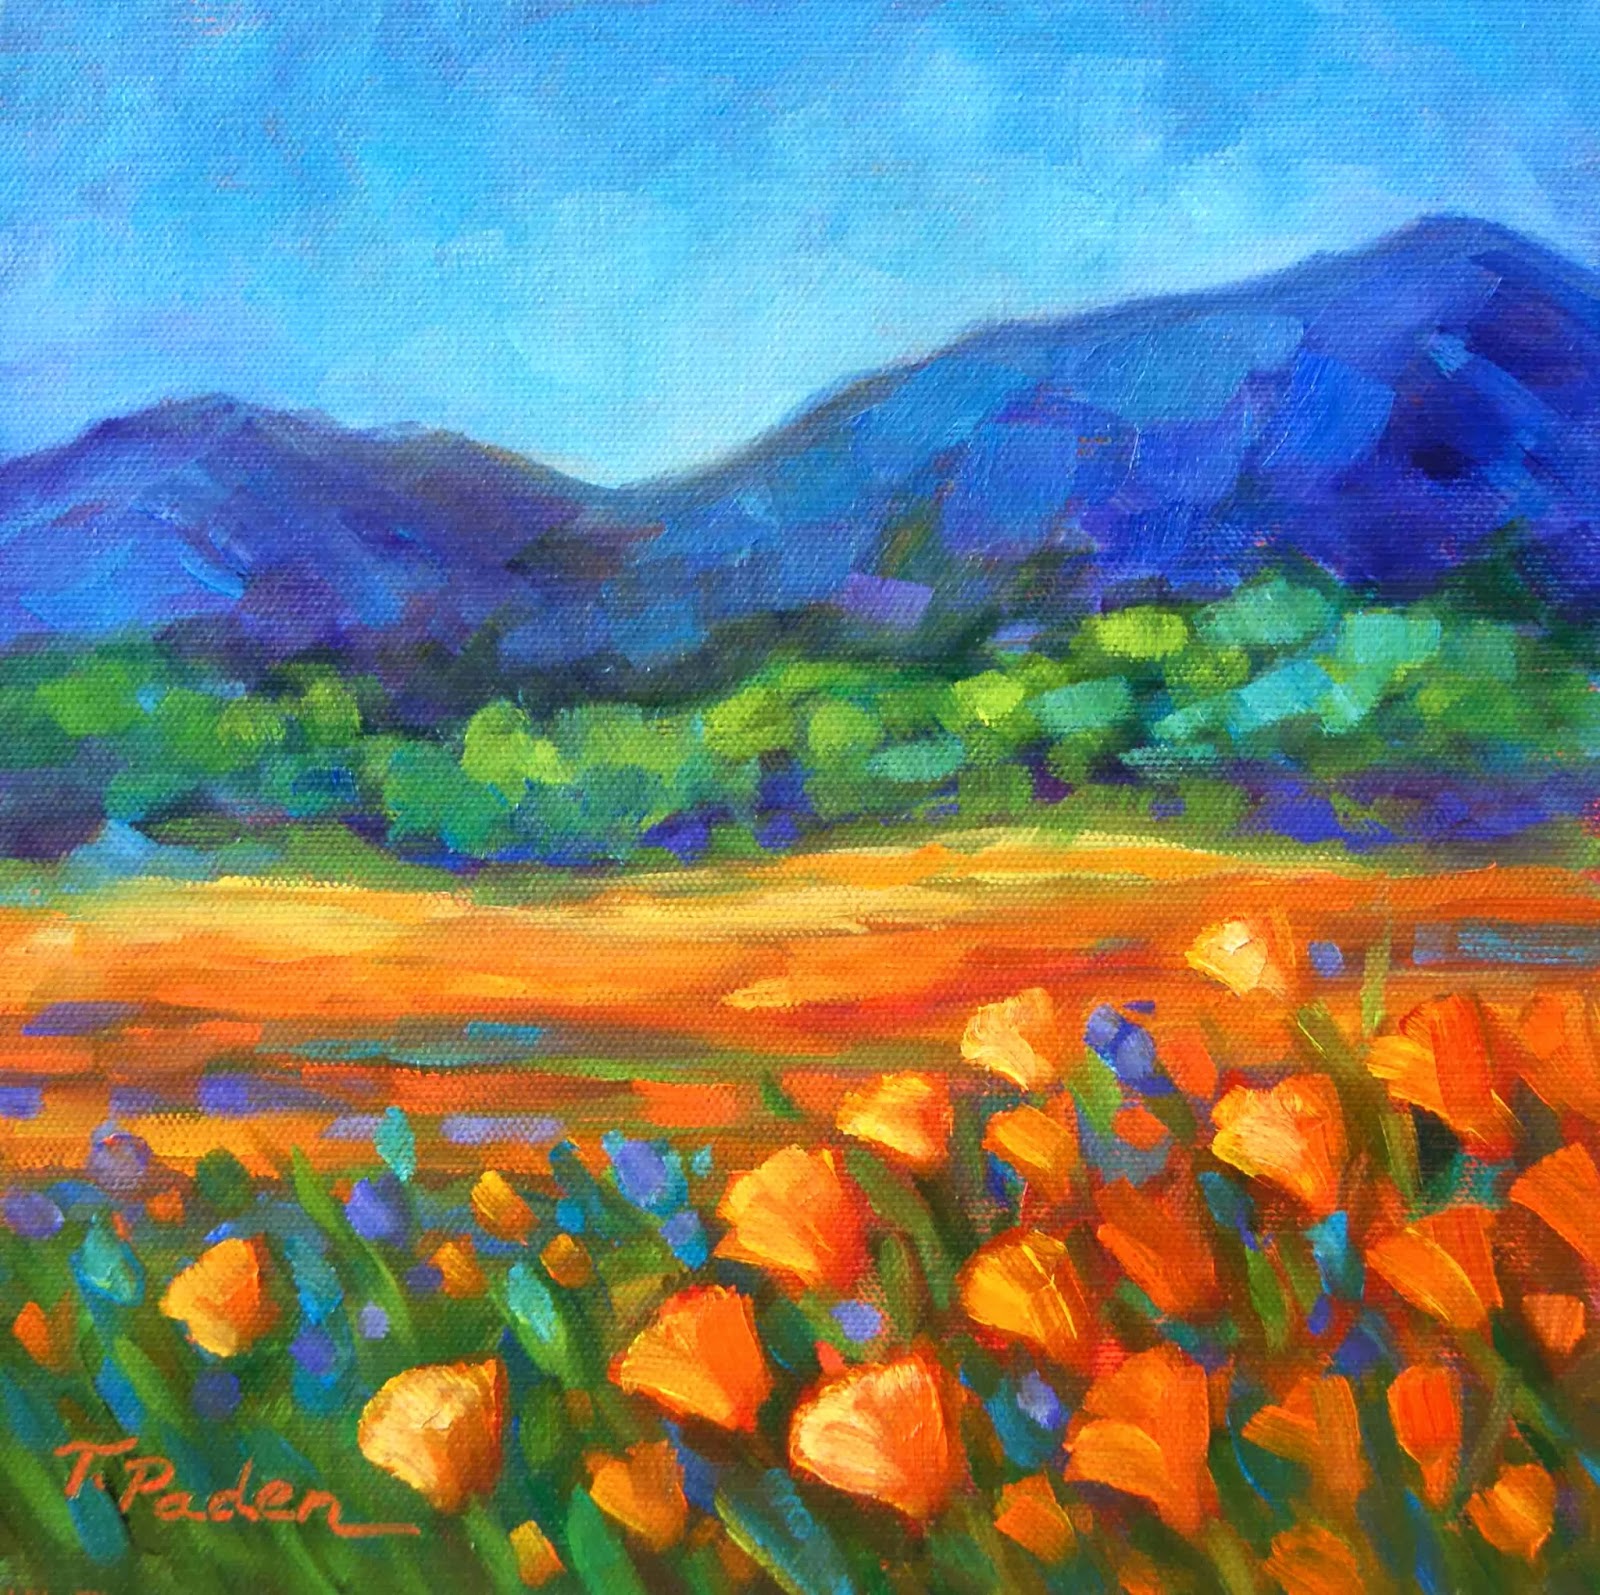 Paintings by Theresa Paden: Colorful Contemporary Landscape Painting by